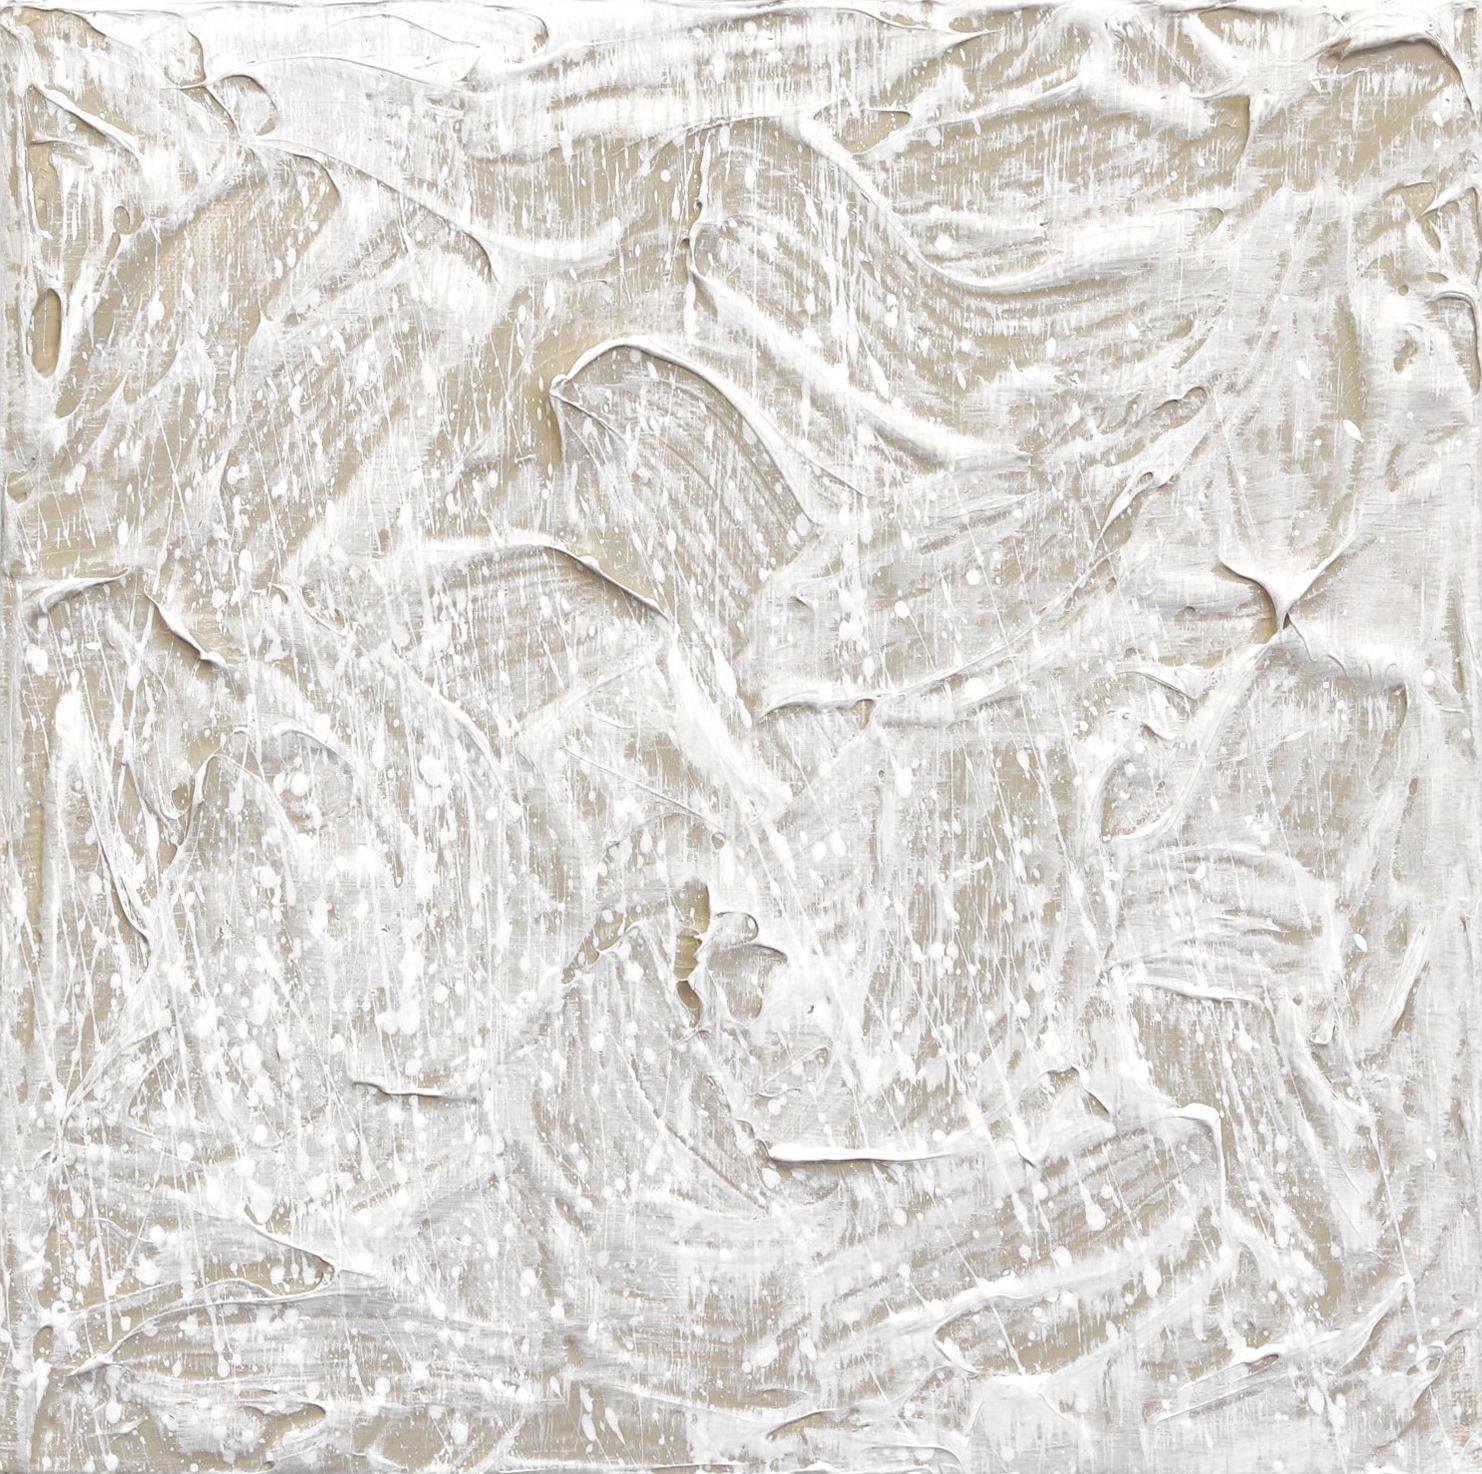 Len Klikunas Abstract Painting - Forces of Nature 6  - Rich Textured Abstract Beige Minimalist Artwork on Canvas